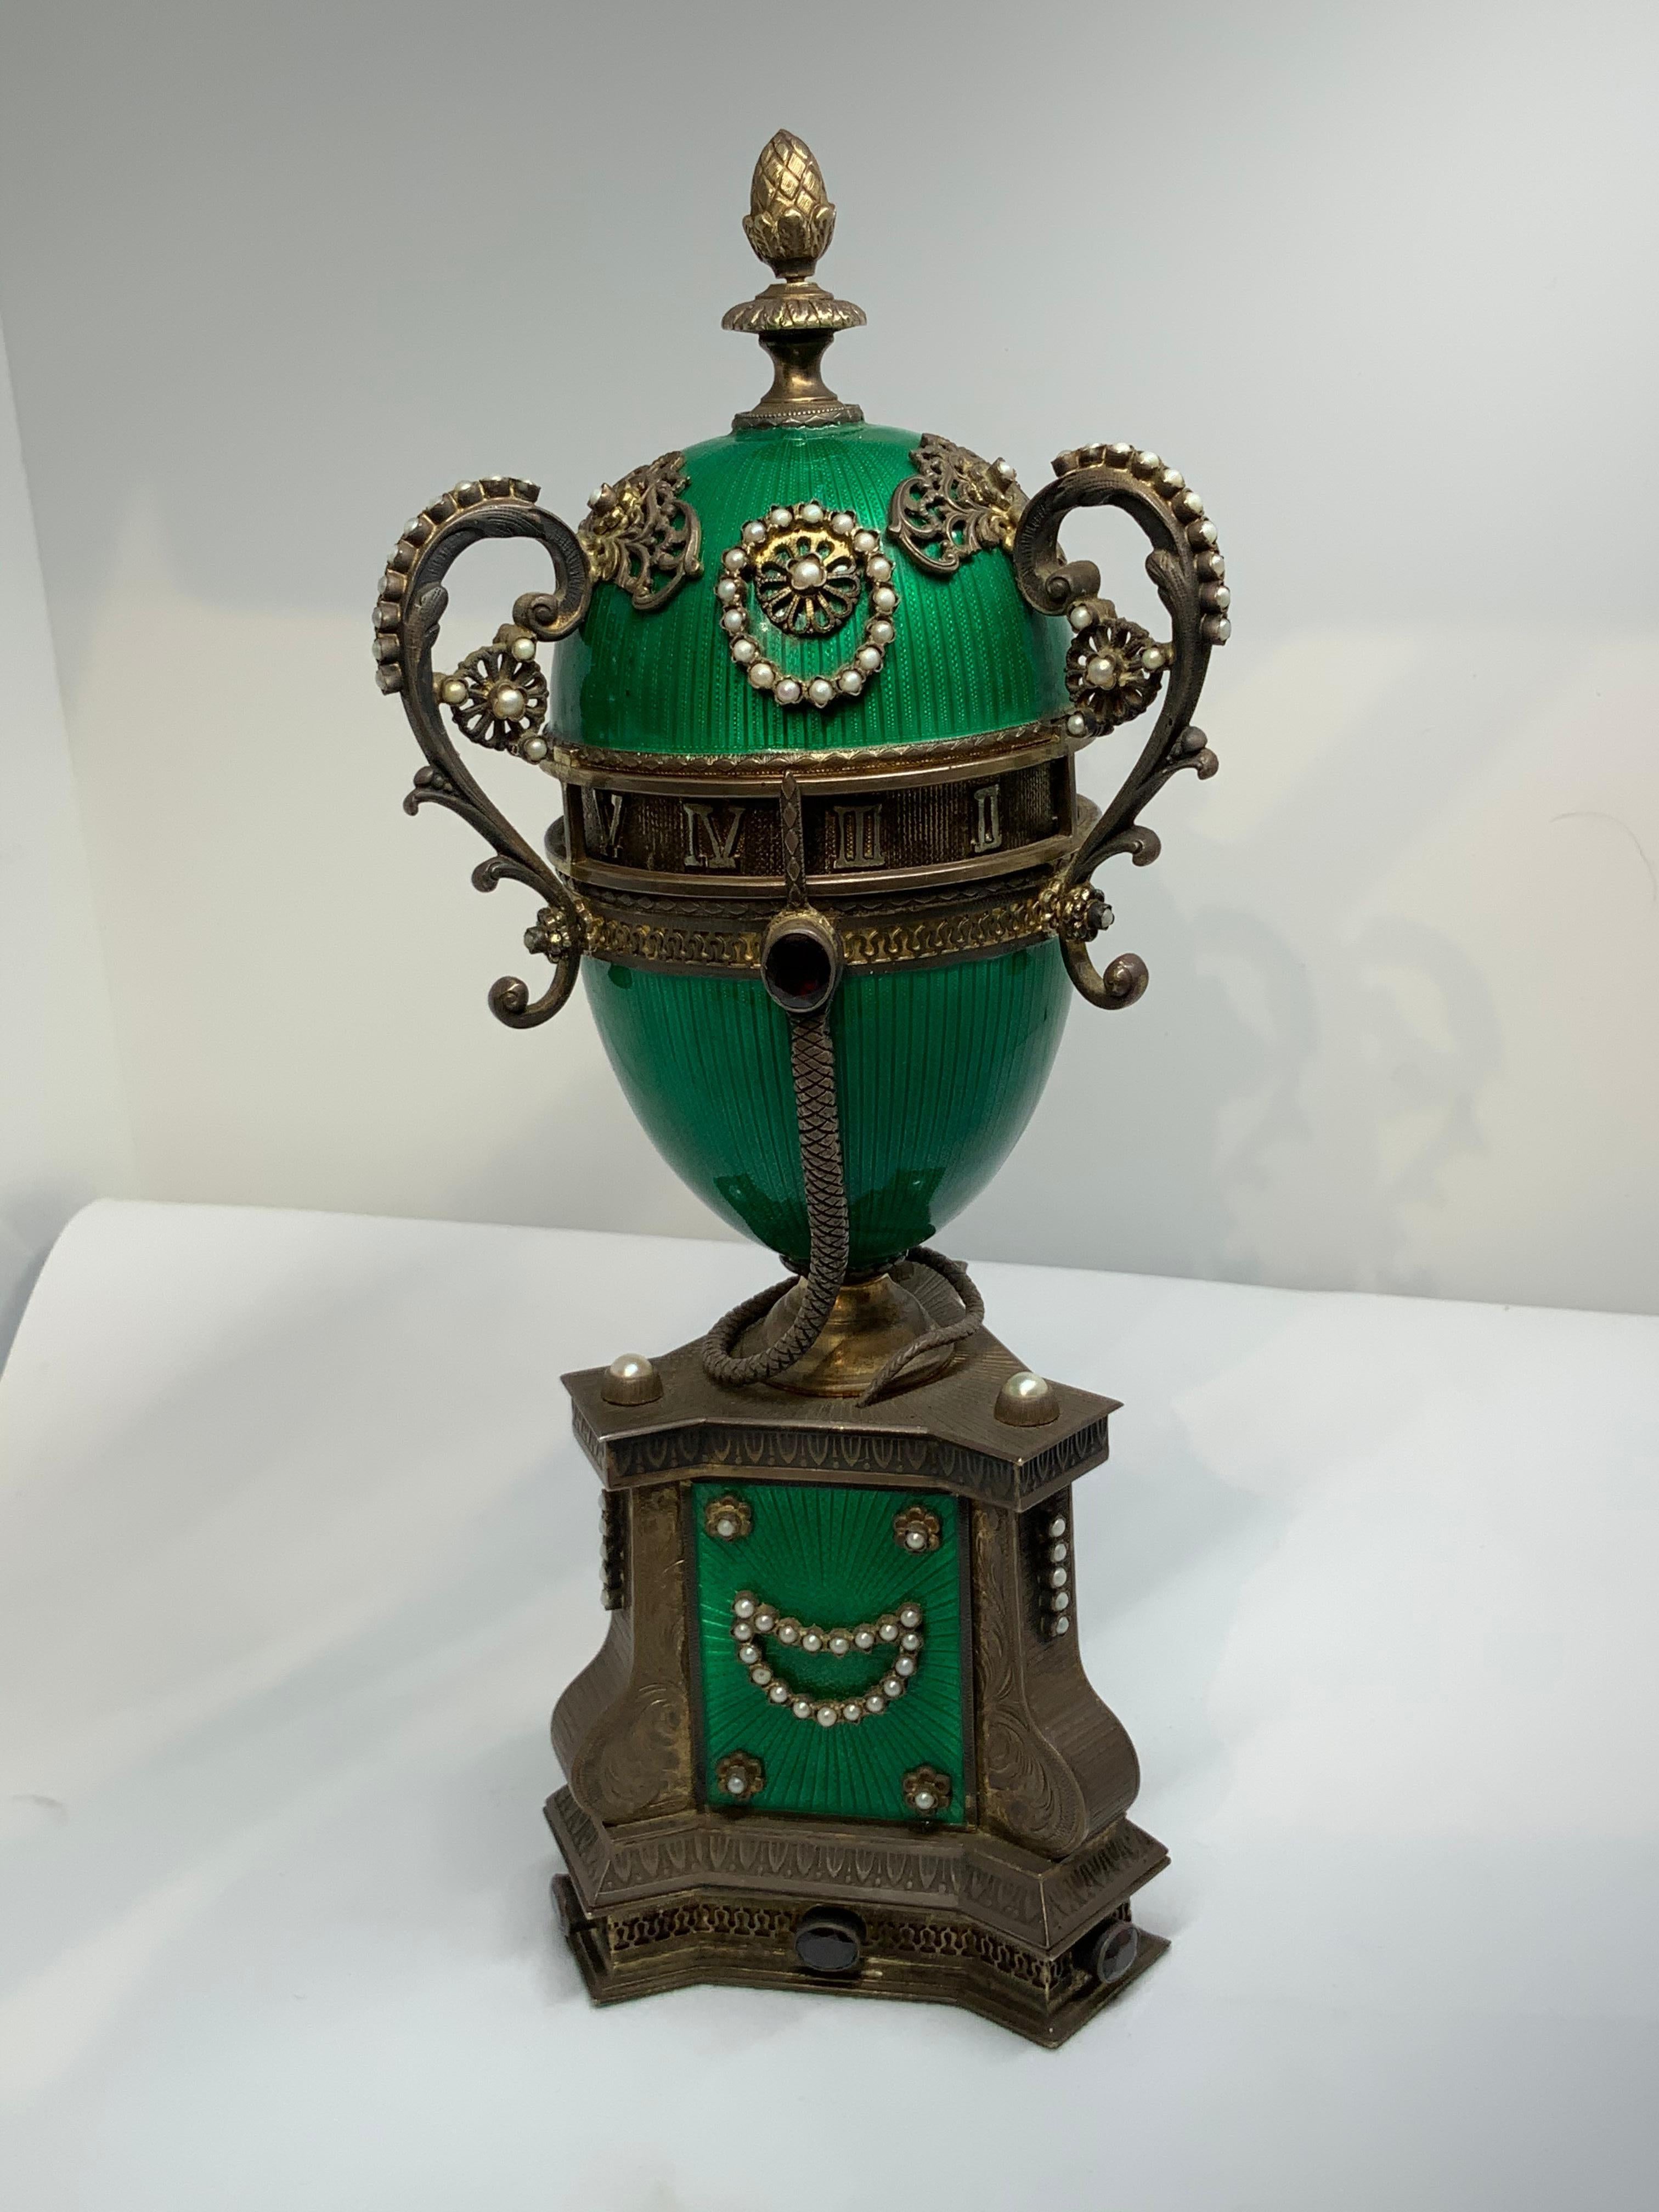 Faberge Style Guilloche Egg Gilt Silver Annular Serpent Clock 6